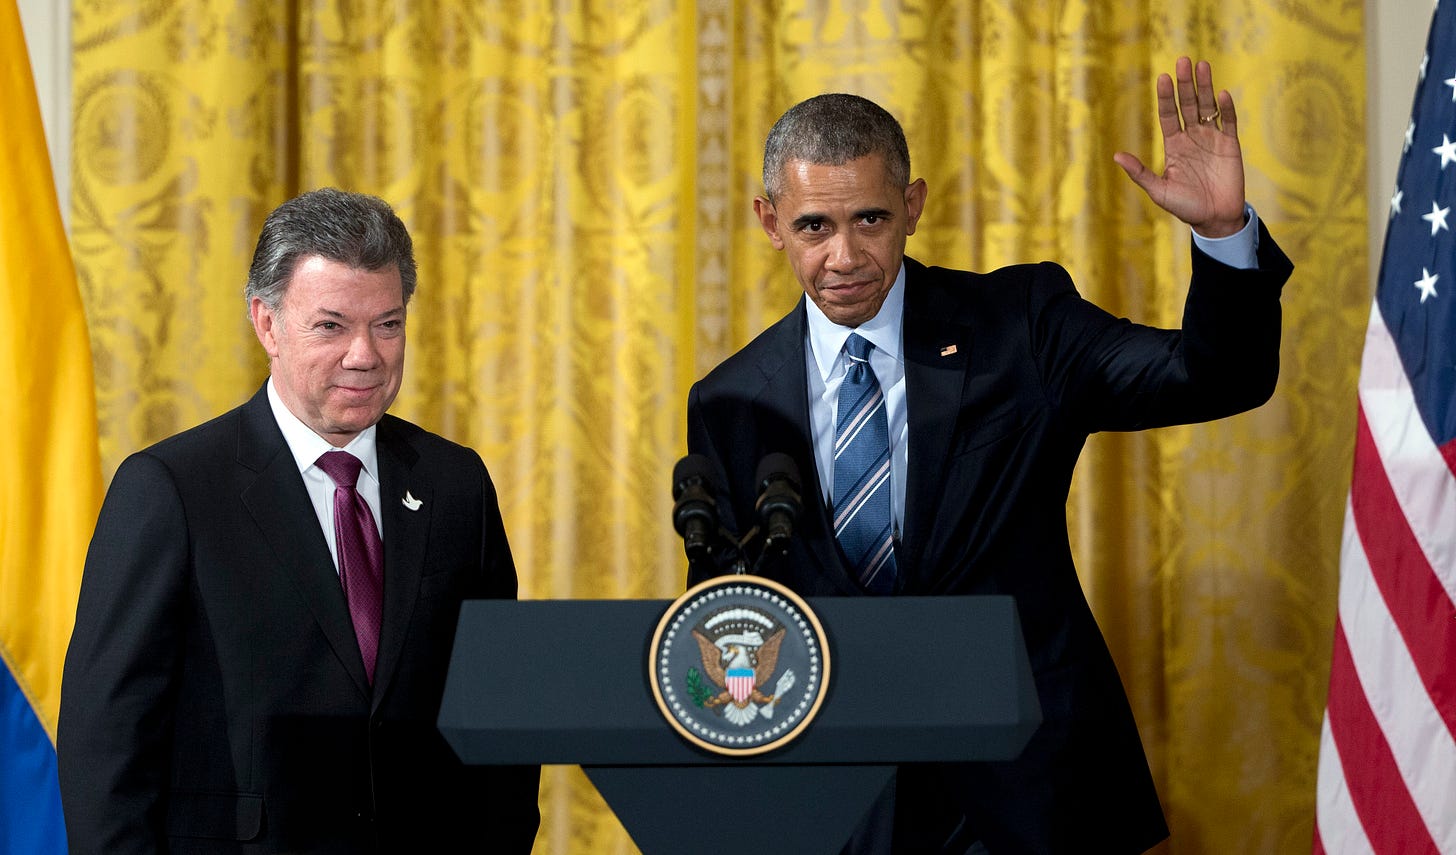 Paz Colombia': Santos, Obama Announce Next Chapter of U.S. Support